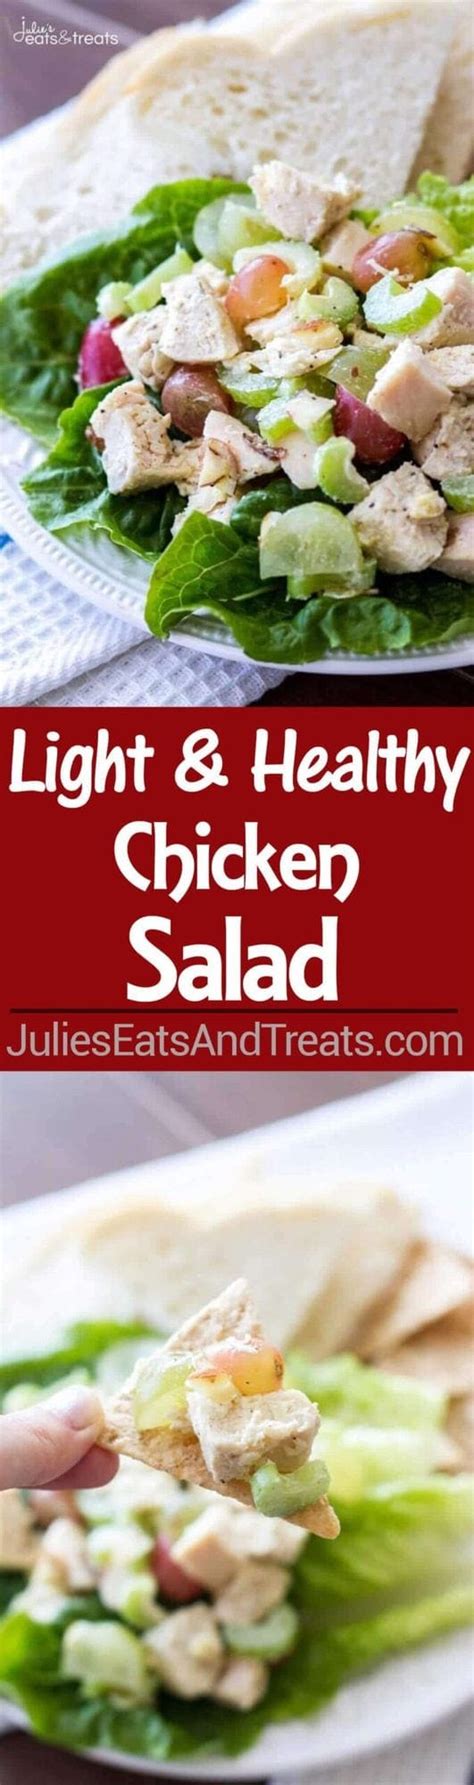 Light And Healthy Chicken Salad Julies Eats And Treats